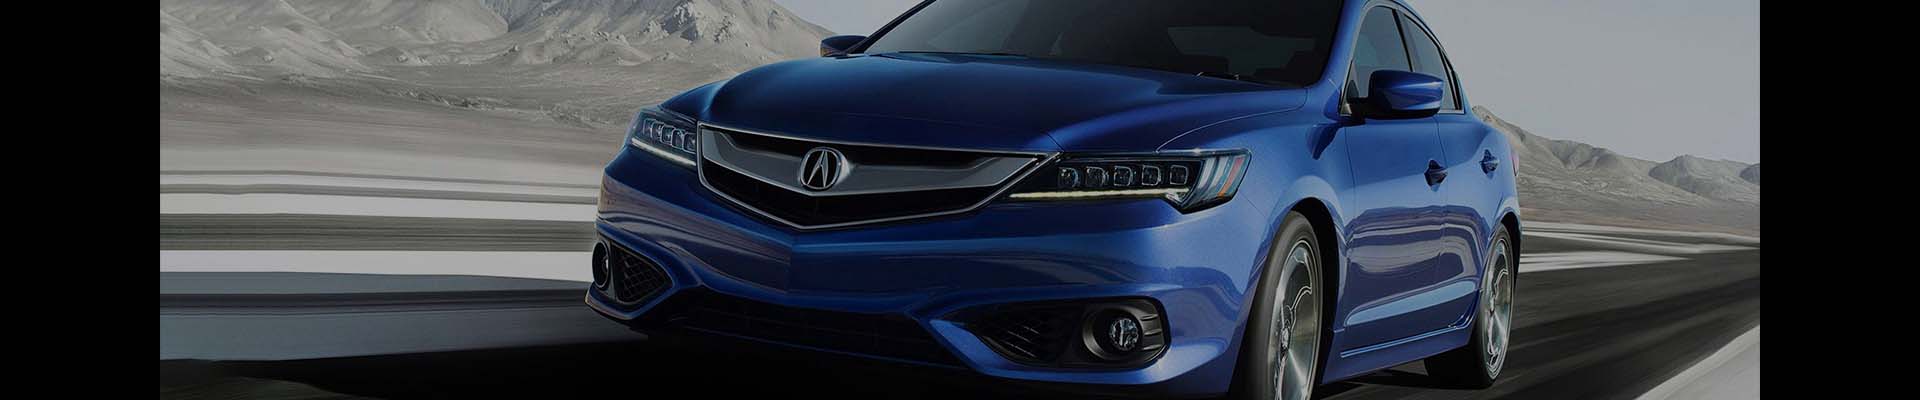 Shop Replacement and OEM Acura Parts with Discounted Price on the Net